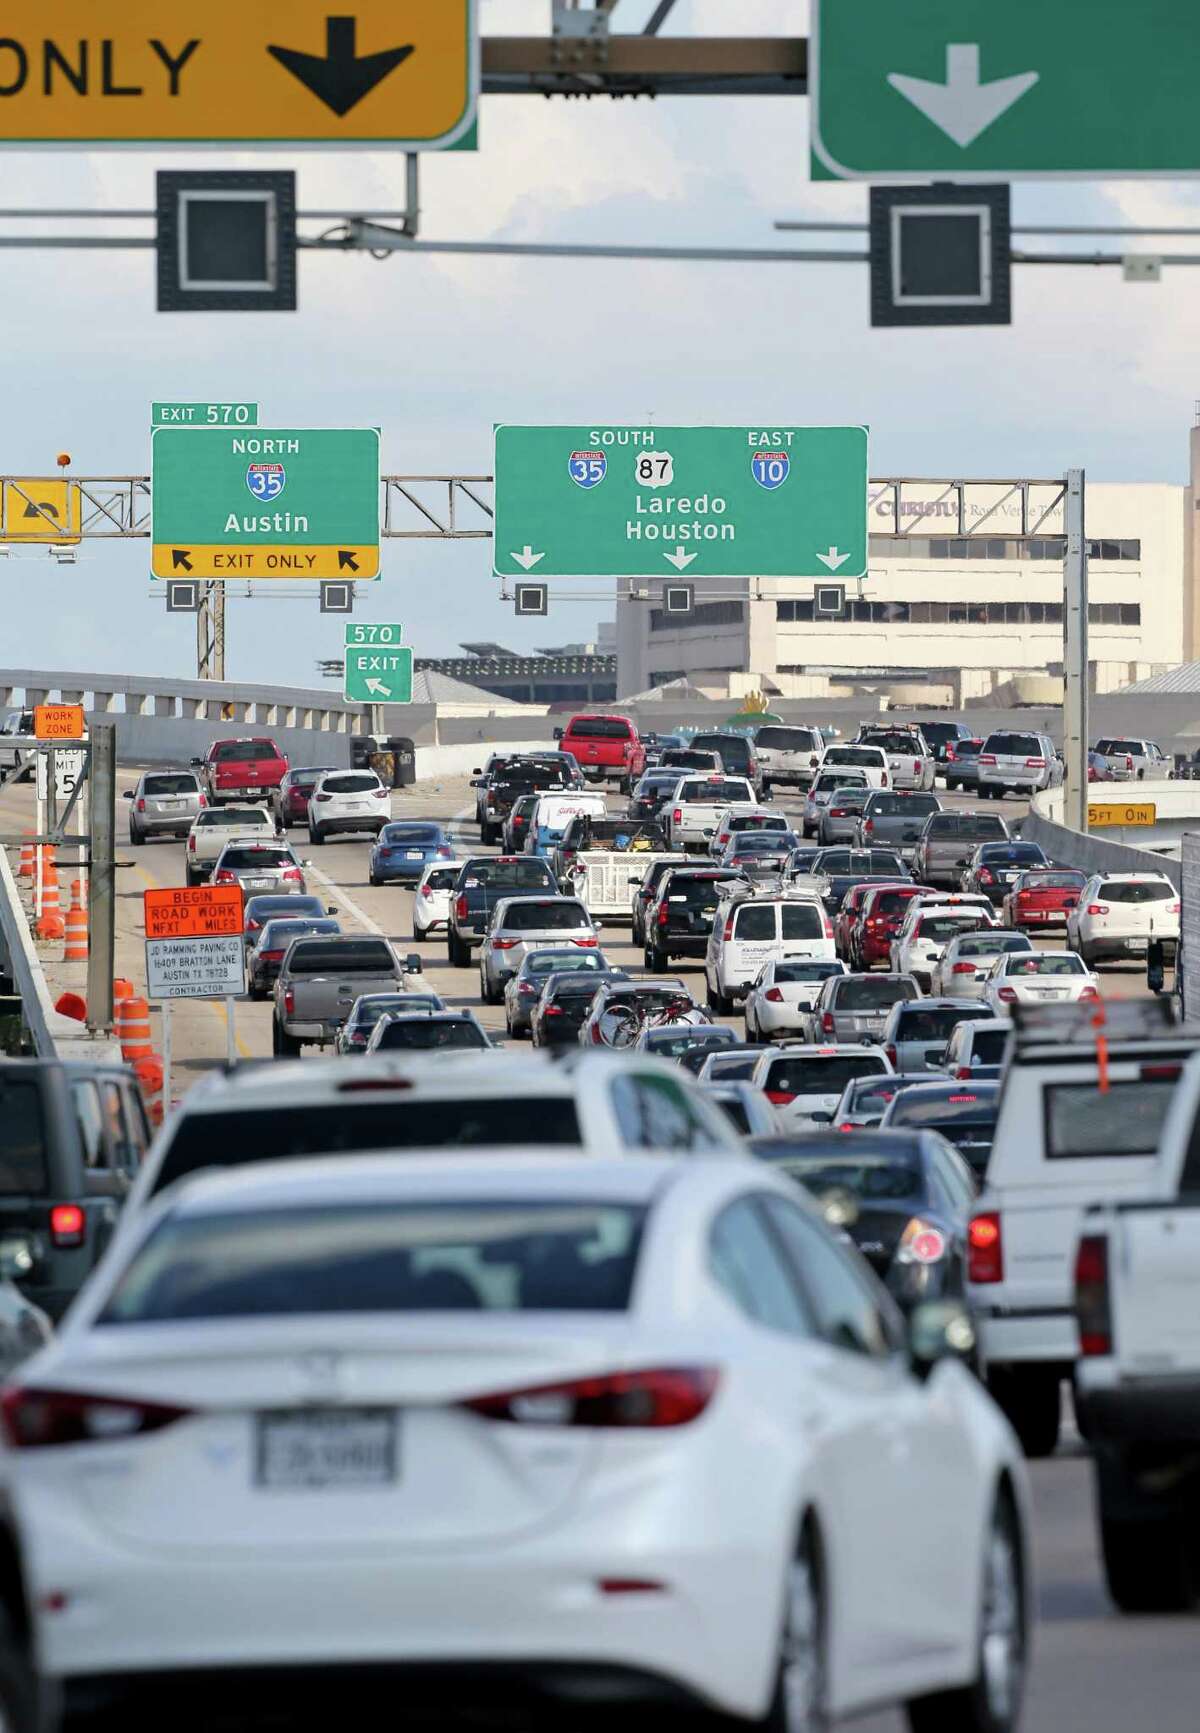 A federal tax on vehicle miles traveled, as opposed to a per-gallon tax on gasoline, lead to a better payoff for funding roads, according to a study by the Brookings Institution’s Clifford Winston, the University of Arizona’s Ashley Langer and the University of Houston’s Vikram Maheshri.